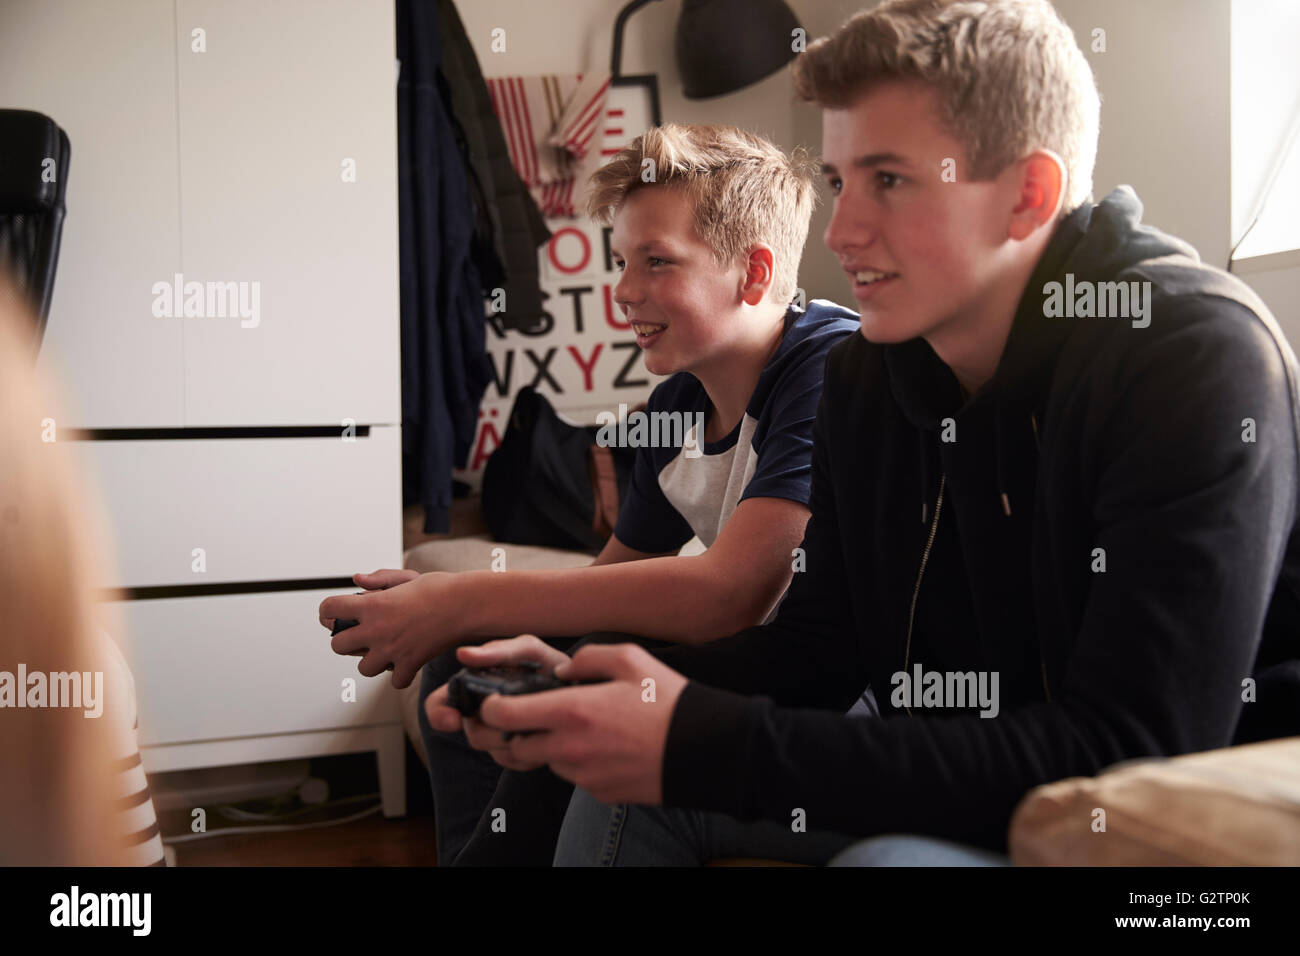 Two Teenage Boys Playing Video Game In Bedroom Stock Photo